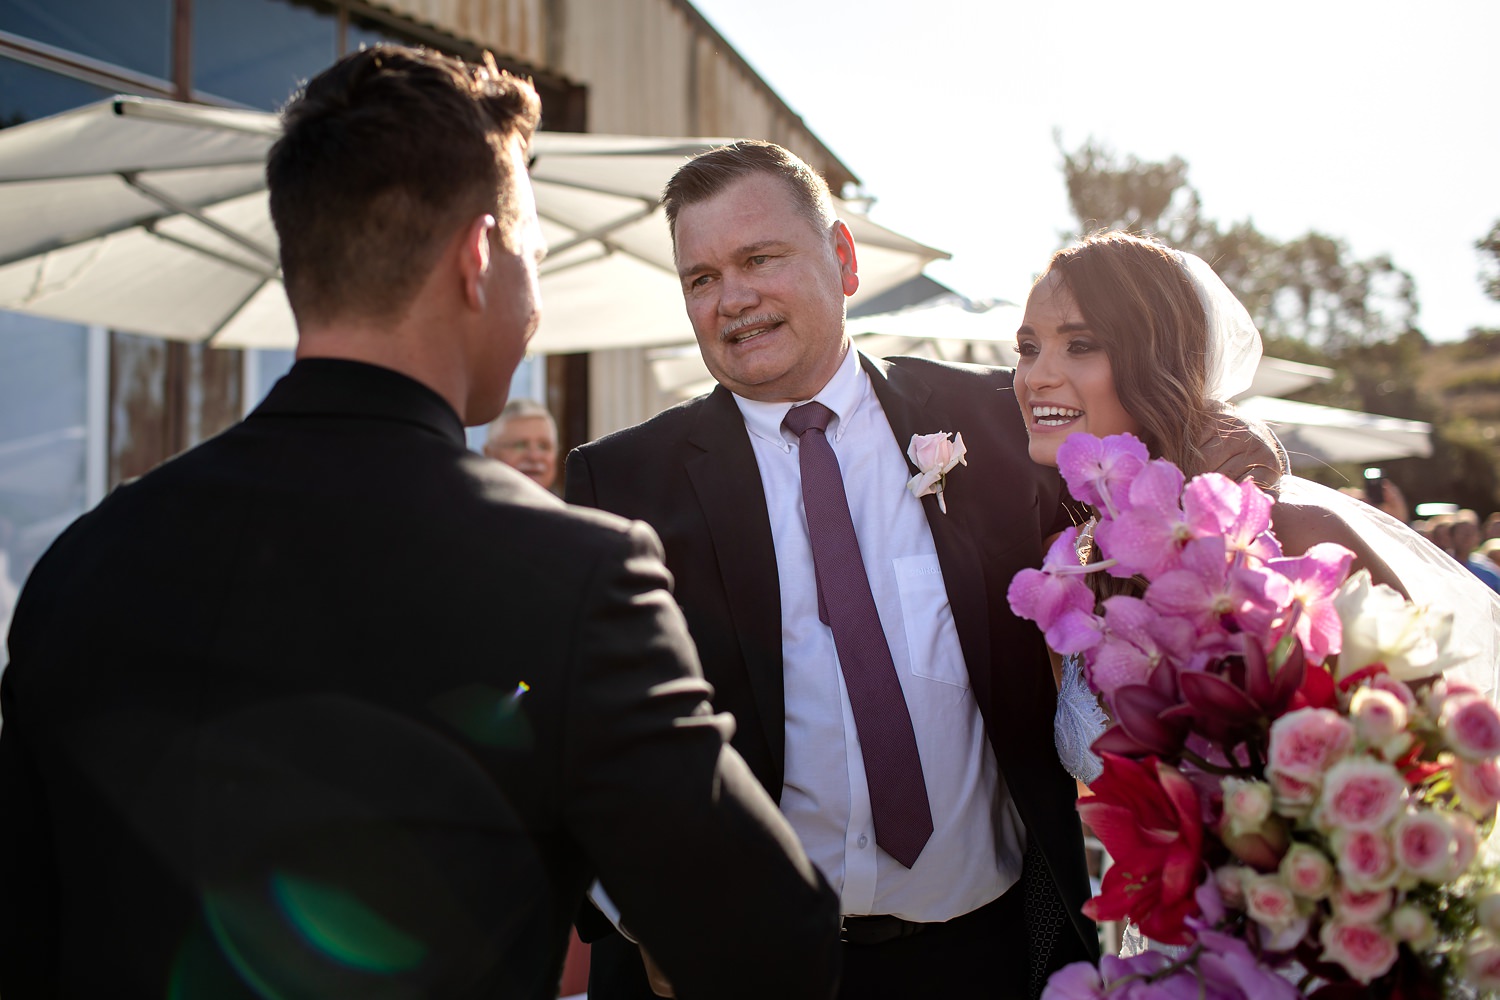 The bride's father shakes the grooms hand and embraces his daughter who holds a stunning cascading orchid bouquet by Otto de Jager